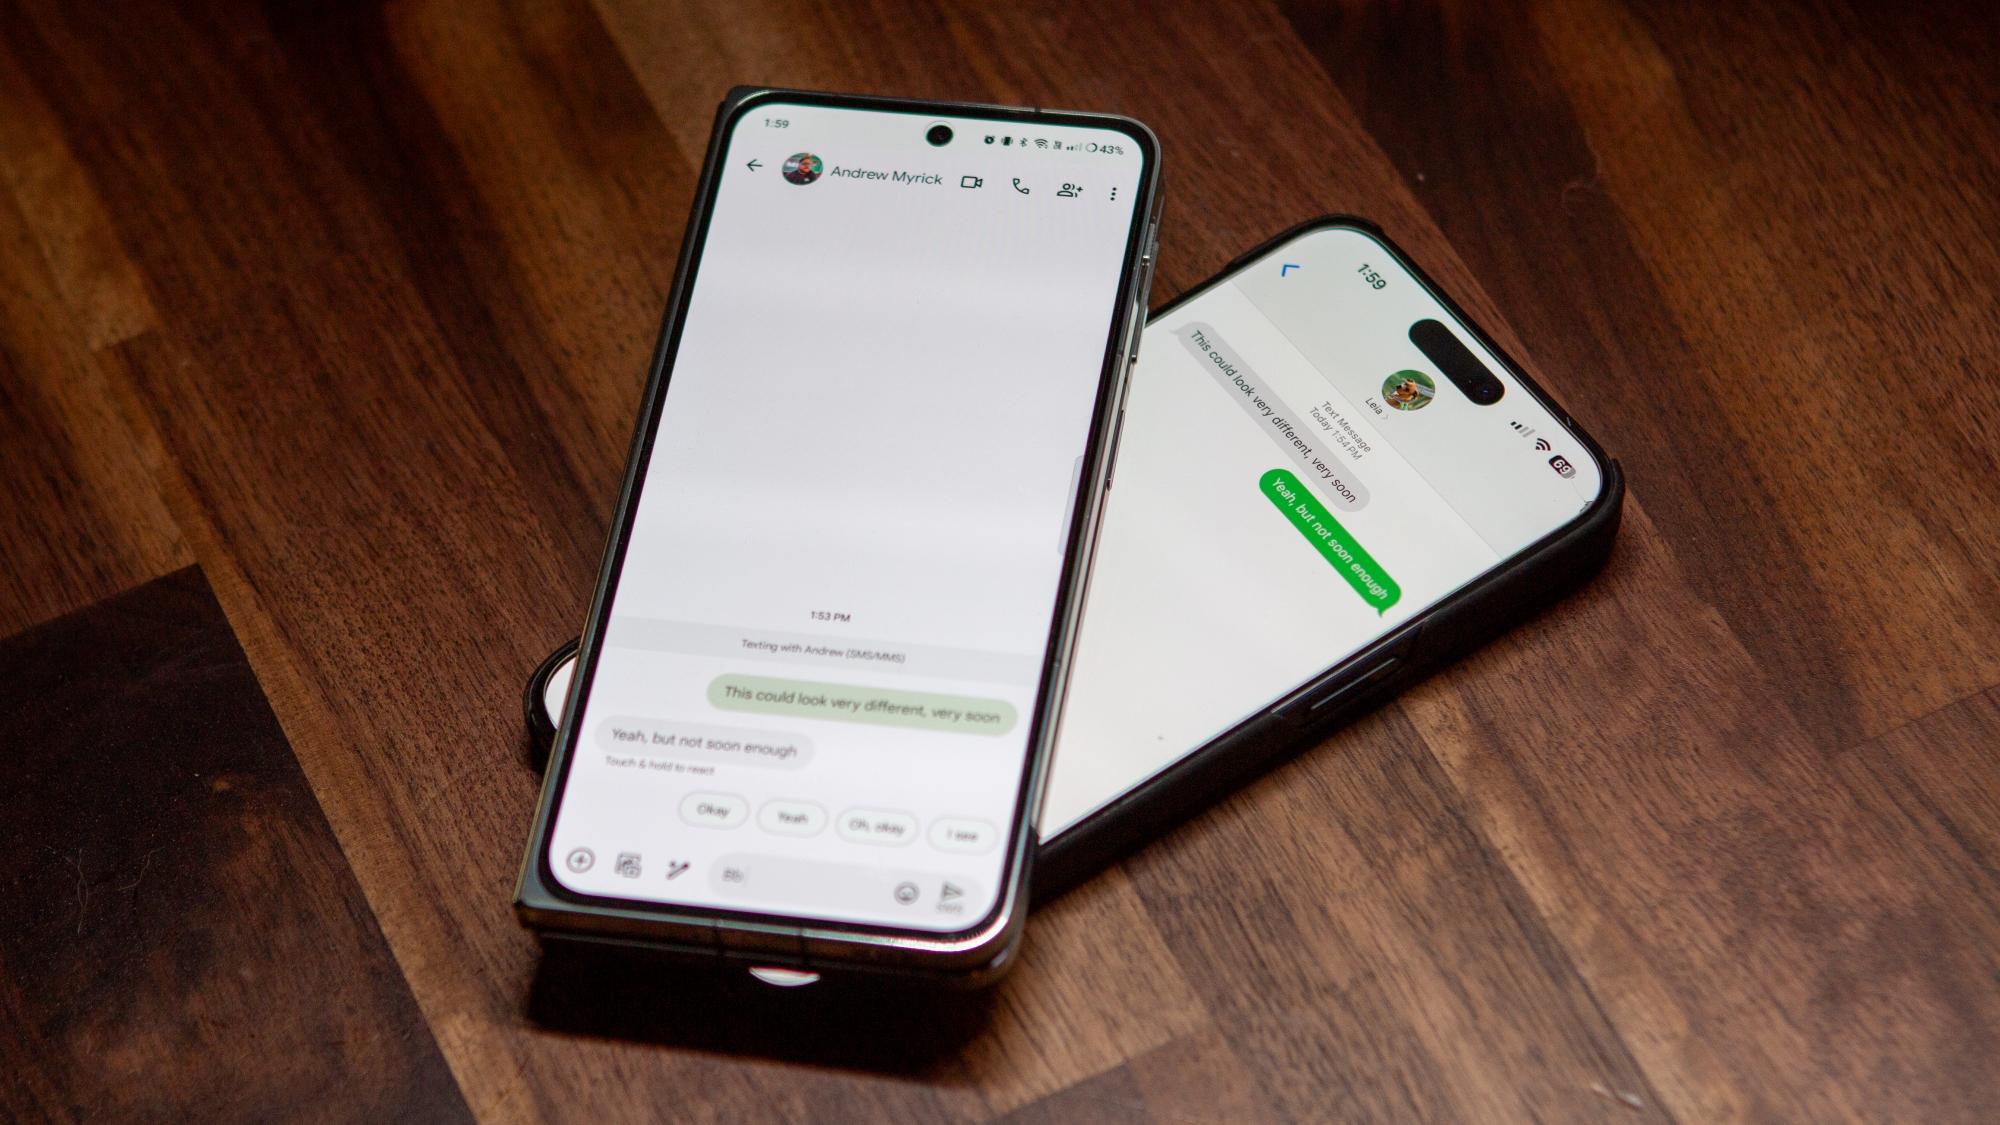 Google Messages on an Android phone and iMessage on an iPhone